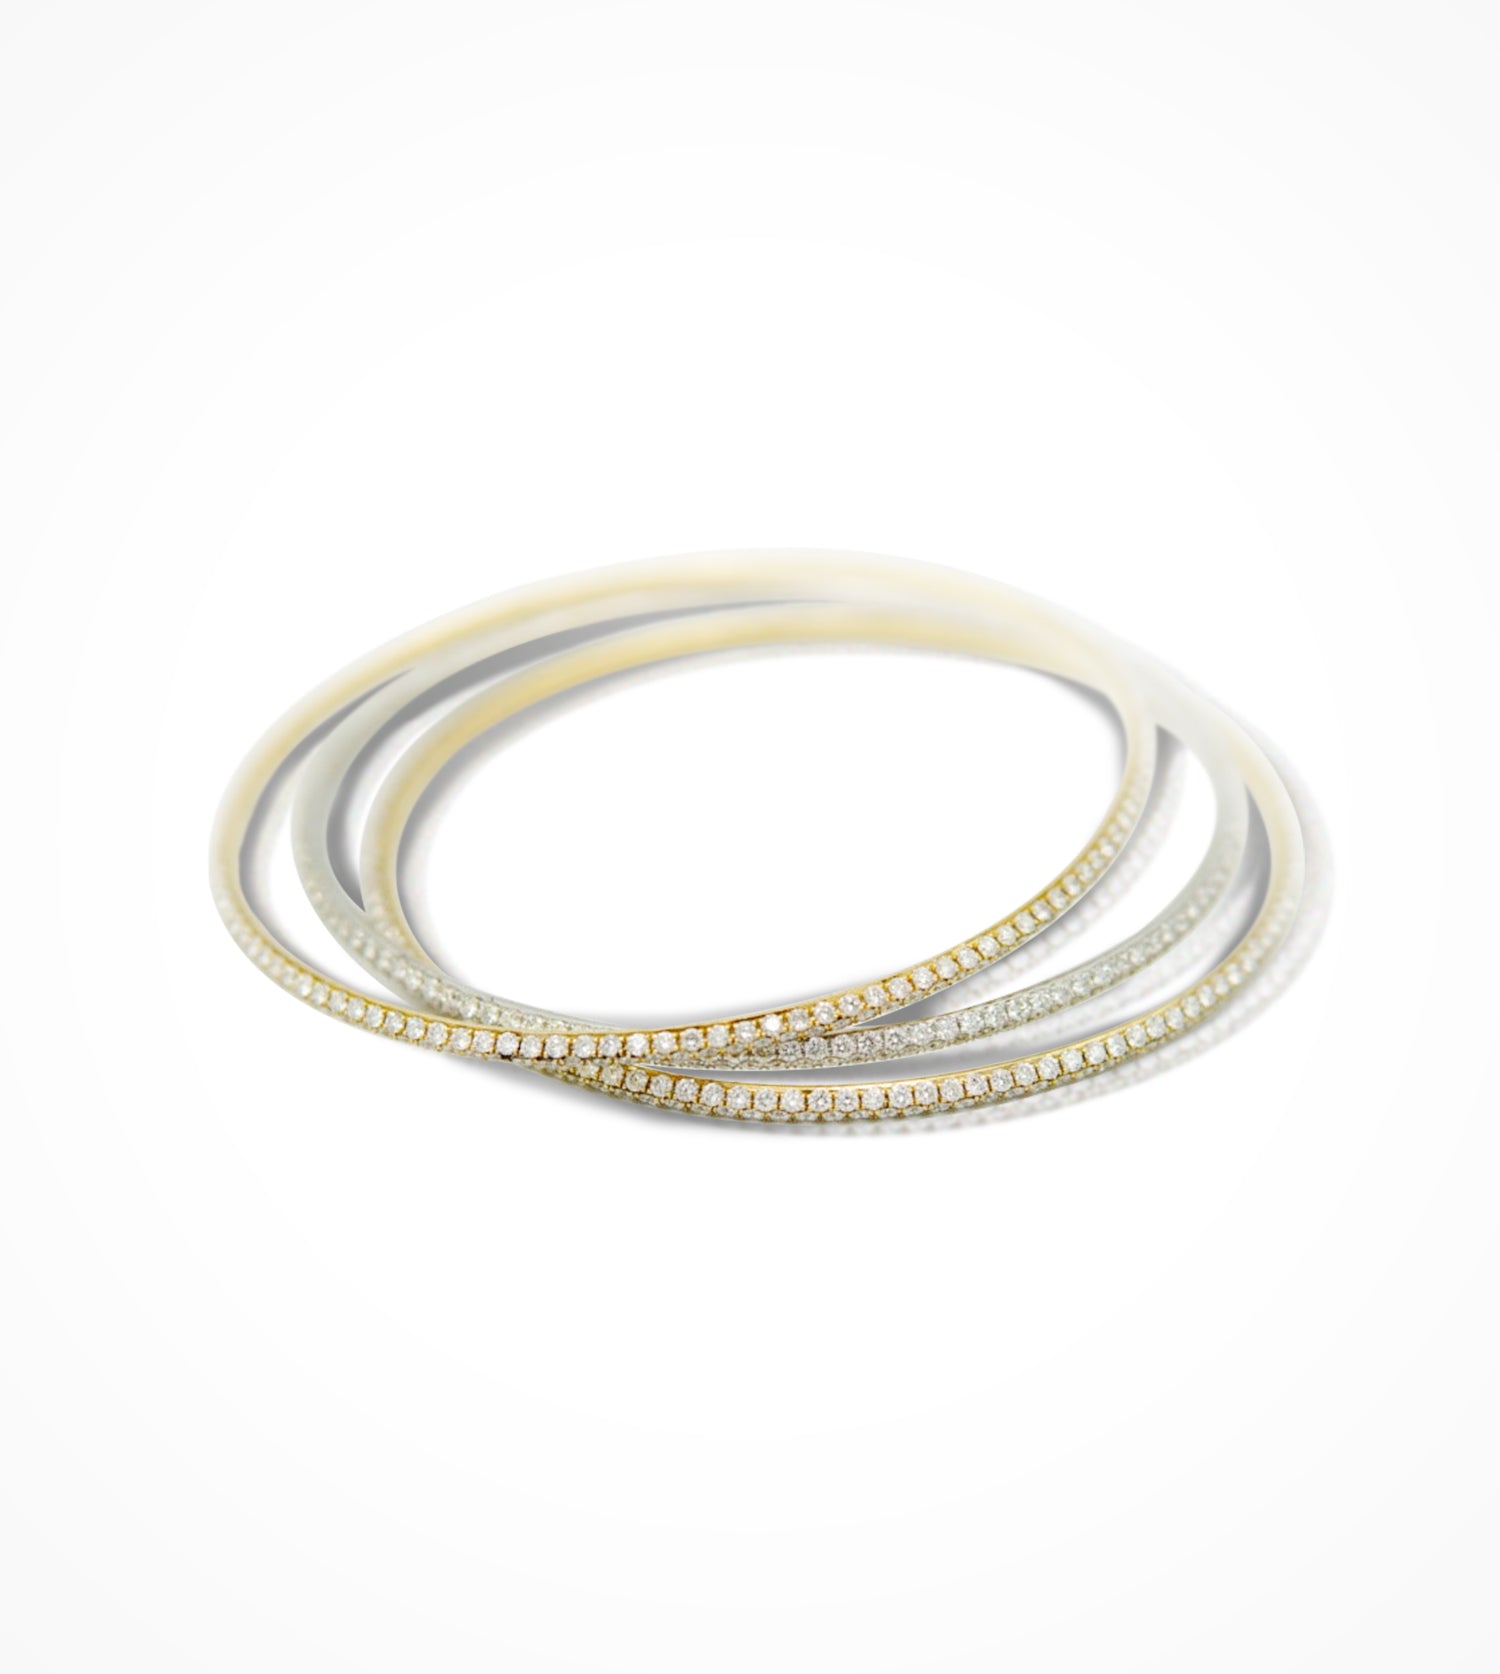 BR07287 18kt pave set two-tone bangles, 2 Yellow Gold, 1 White Gold. Diamonds=11.31cts. Price upon Request.